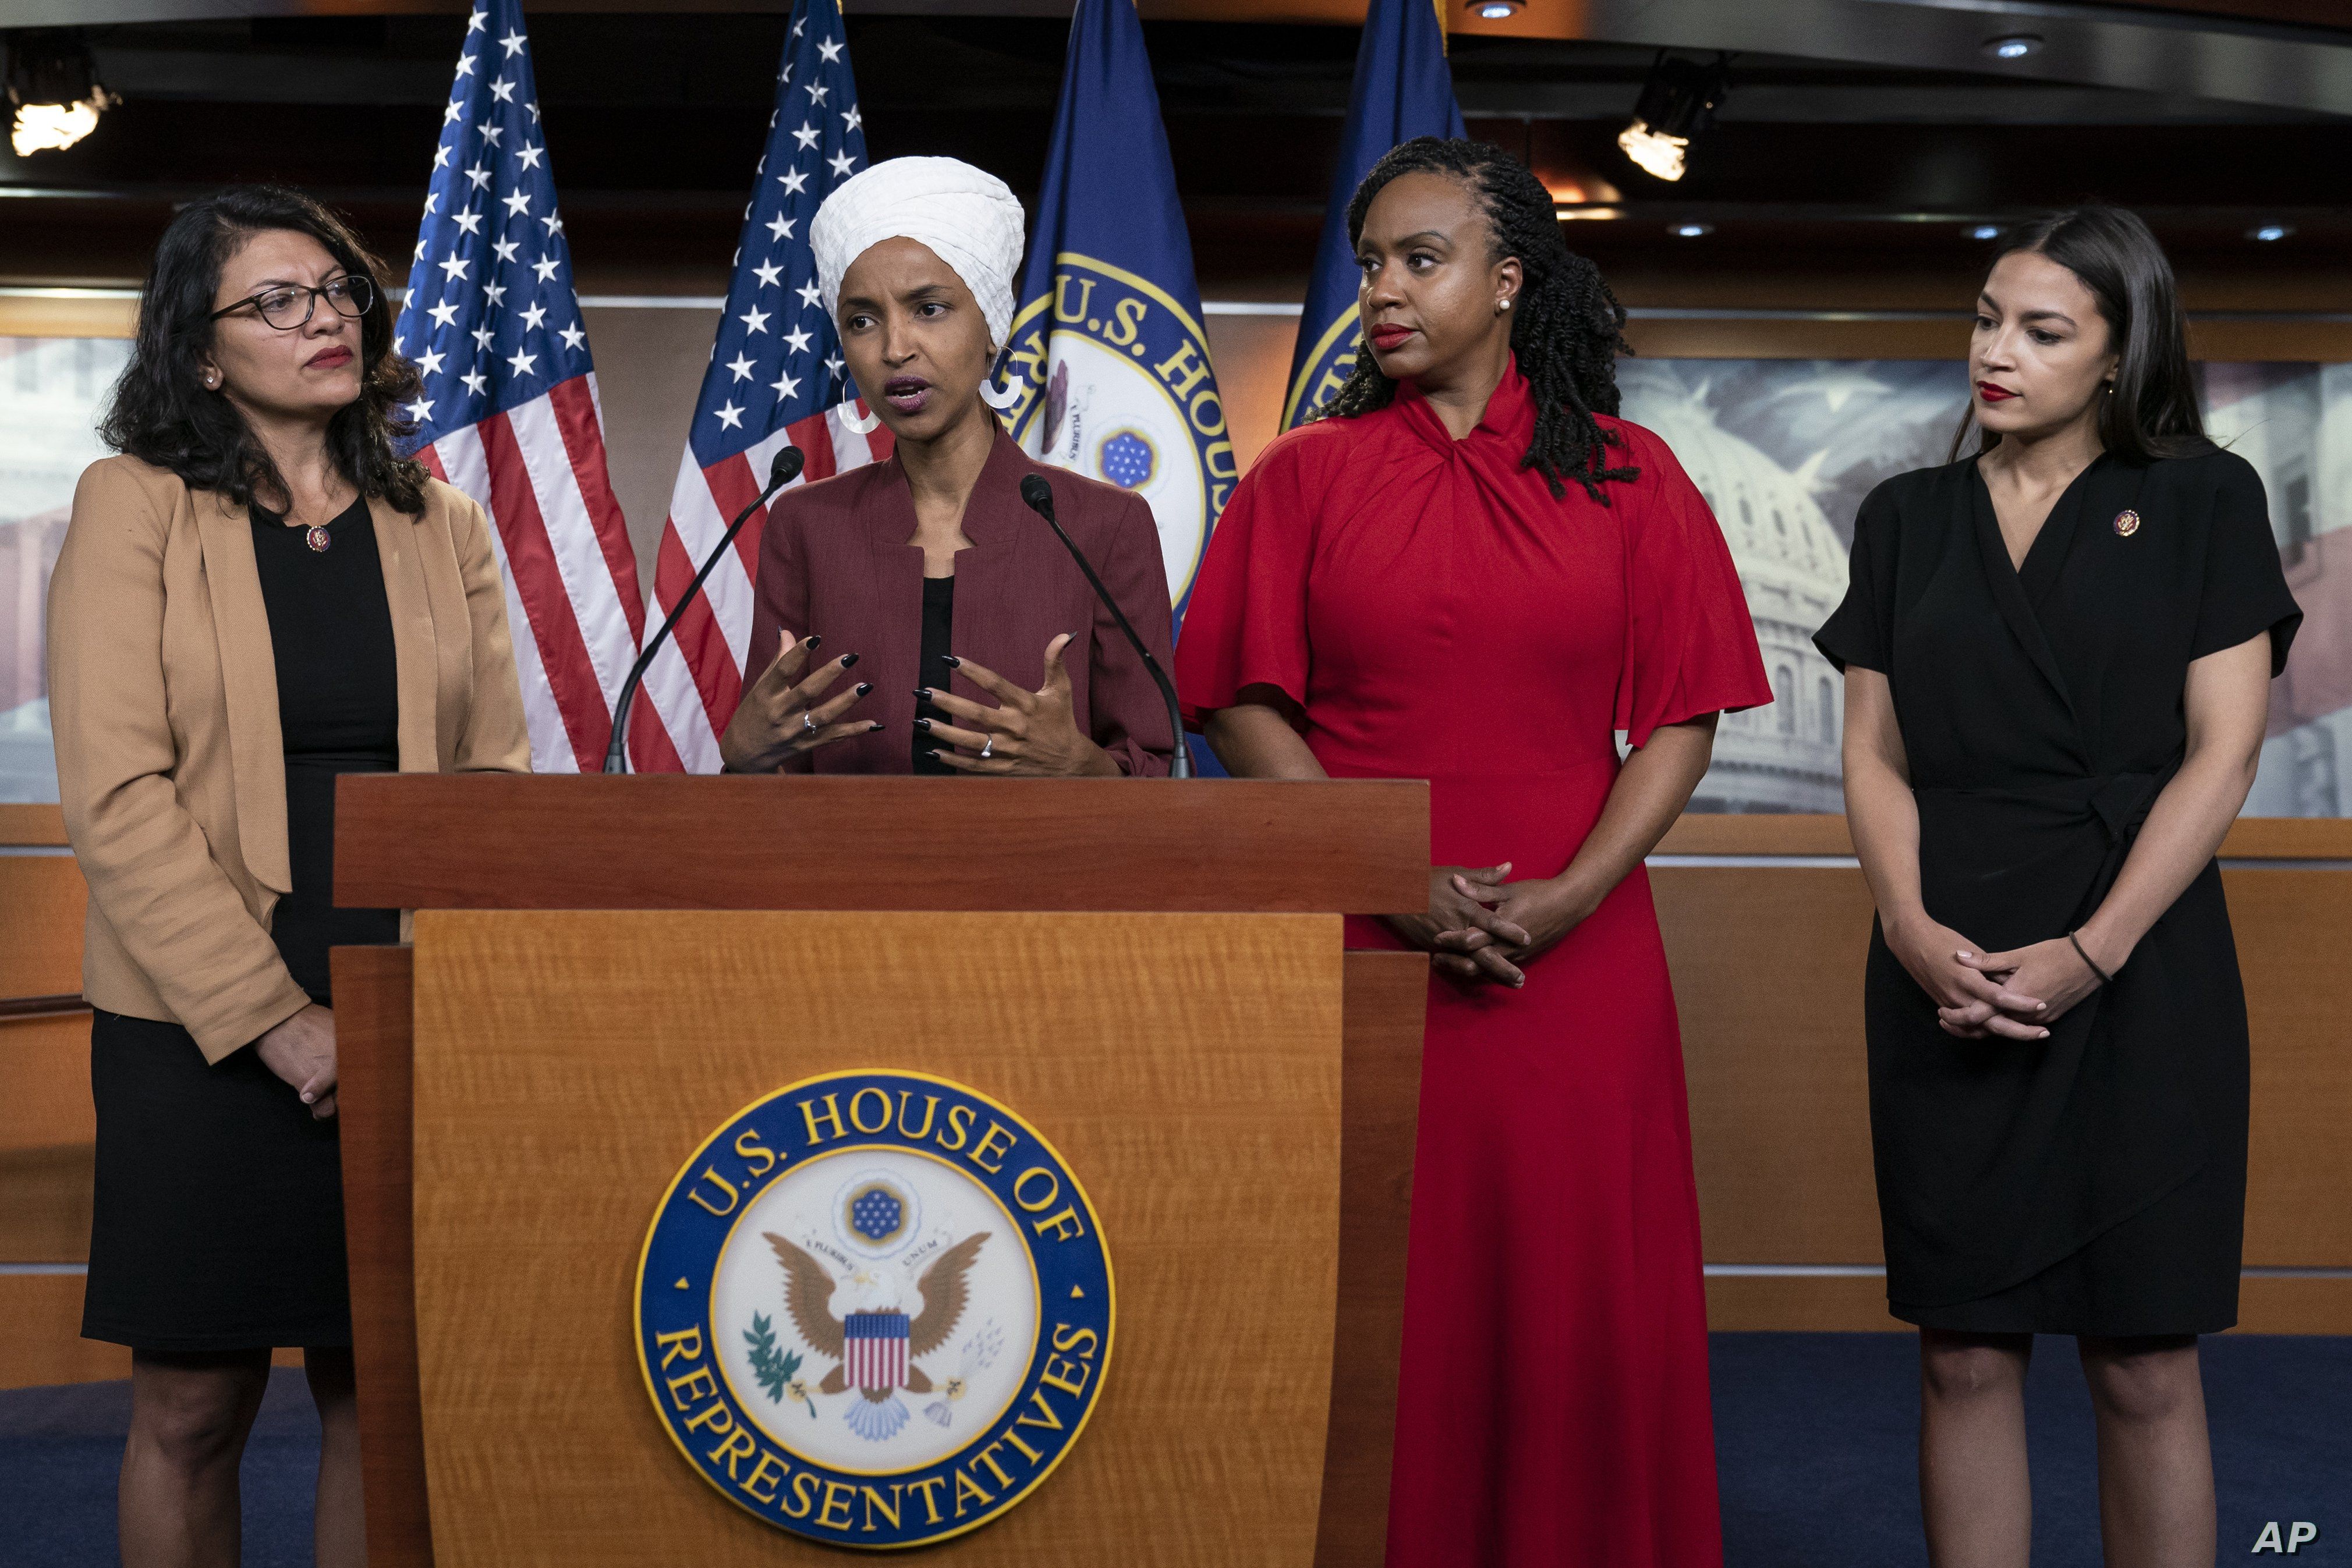 From left, U.S. Reps. Rashida Tlaib, Ilhan Omar, Ayanna Pressley and Alexandria Ocasio-Cortez respond to base remarks by President Donald Trump, at the Capitol in Washington, July 15, 2019. Tuesday, the House voted to condemn Trump for his comments.